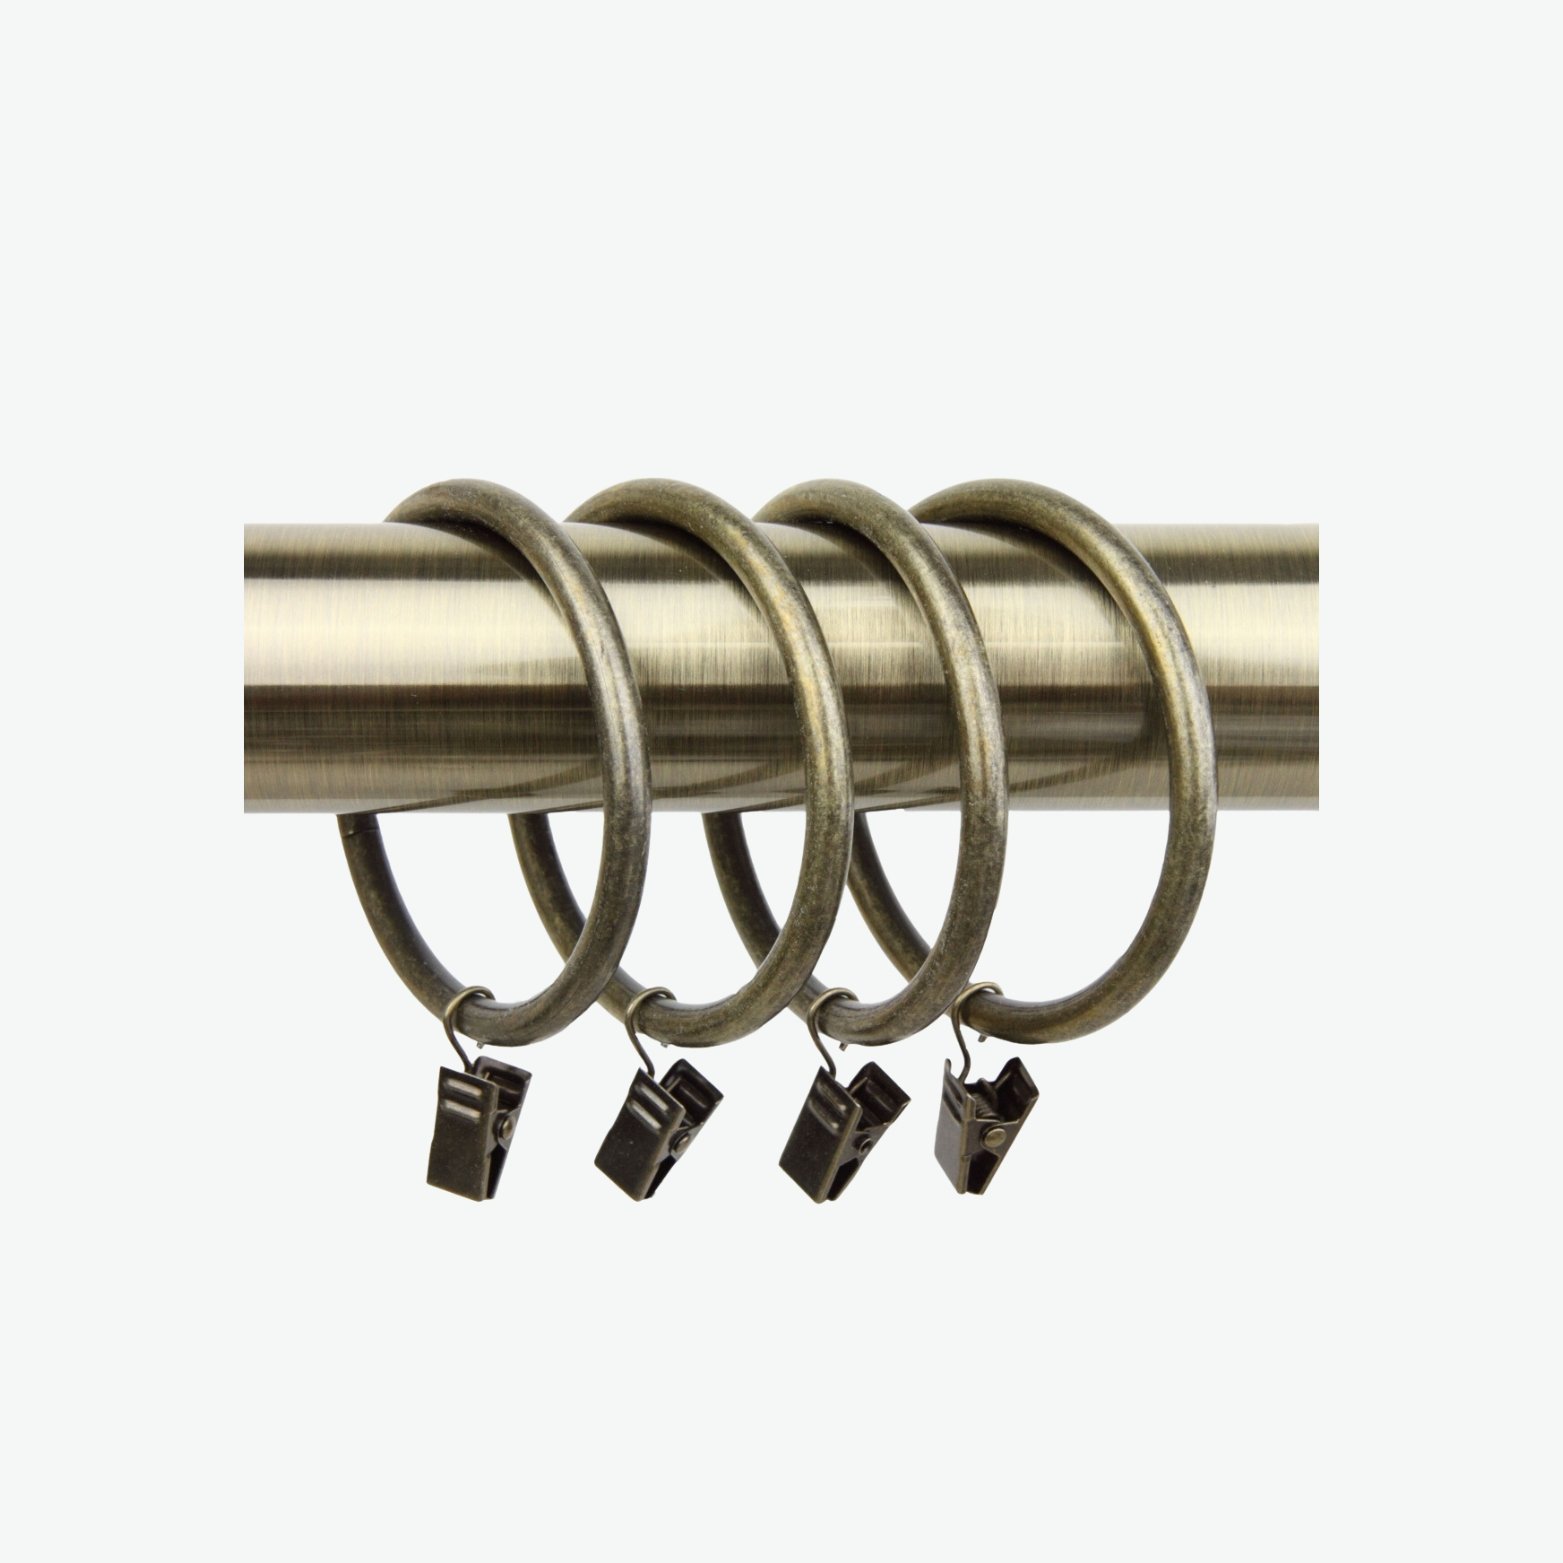 Round Brass Shower Curtain Rings with Clips.jpg